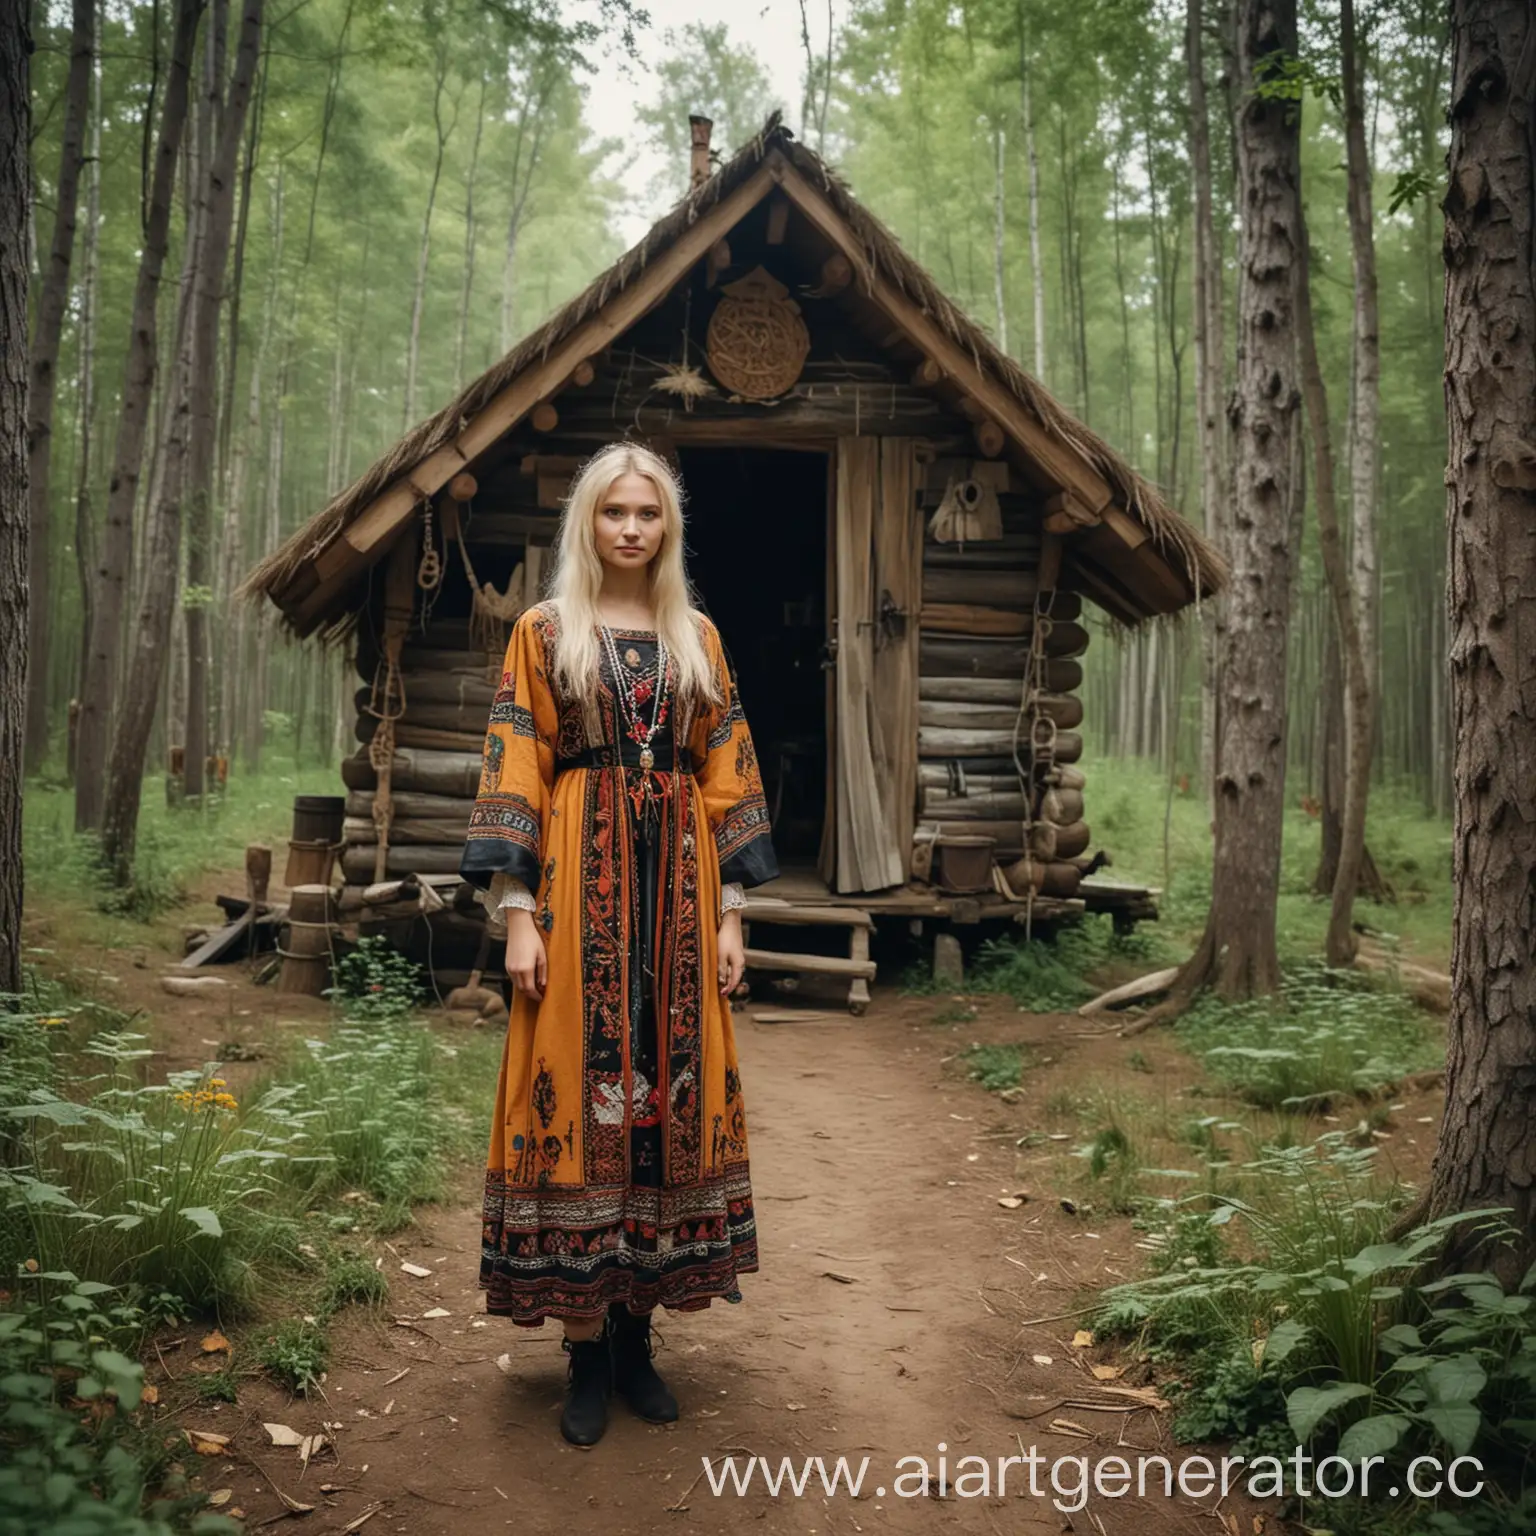 Slavic-FairHaired-Young-Woman-as-Baba-Yaga-in-Enchanted-Forest